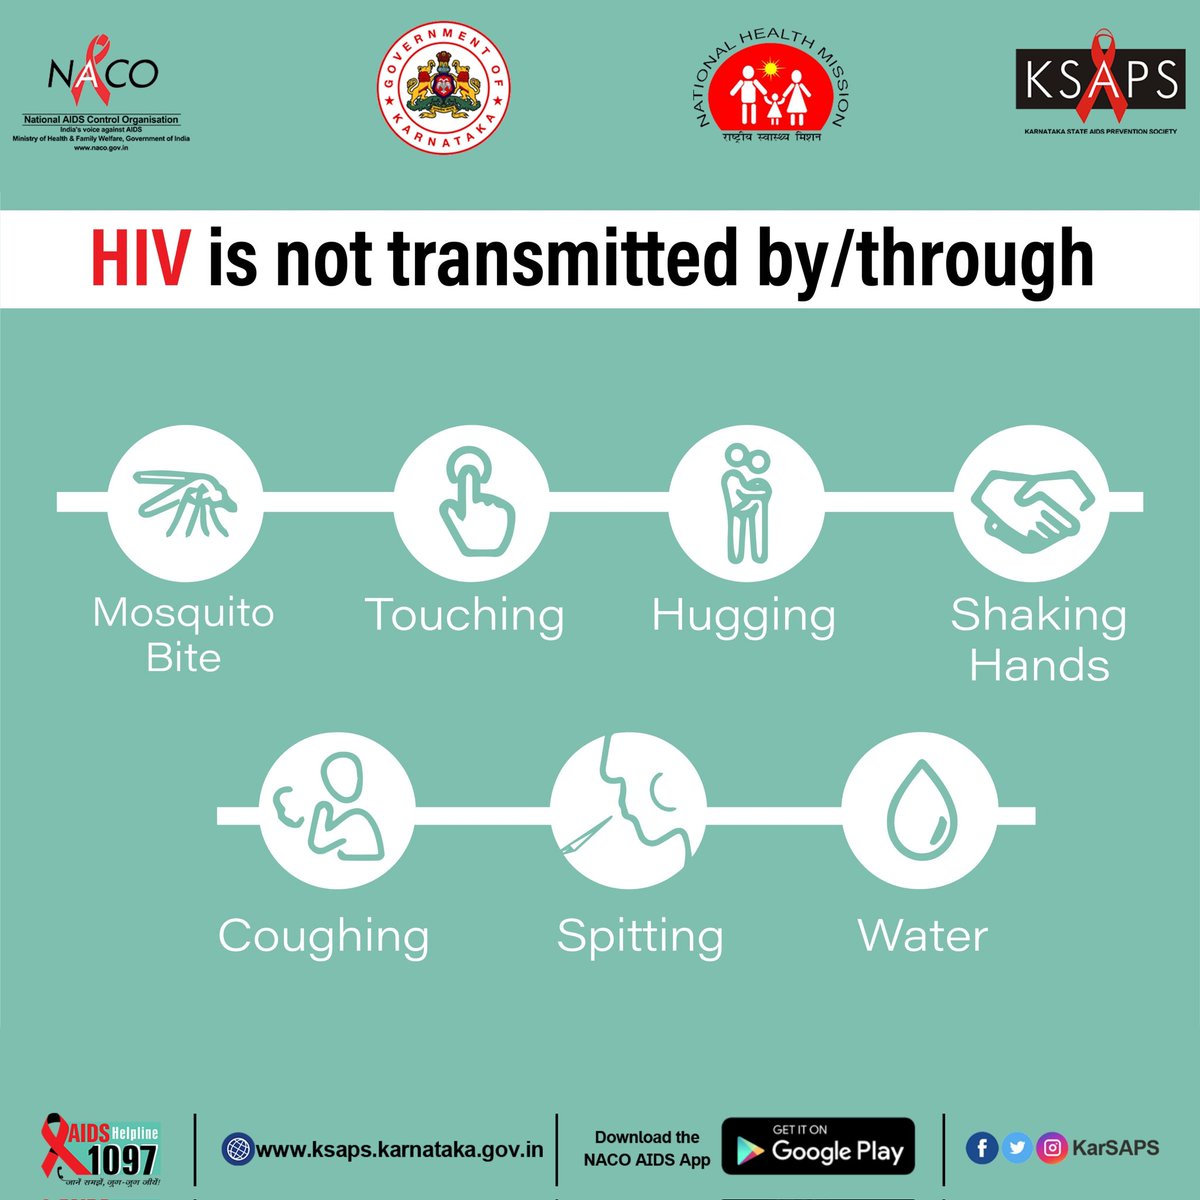 HIV is not transmitted by/through
#HIVtransmission #SpreadFacts #SpreadAwareness #HIV #AIDS #Facts #HIVTesting